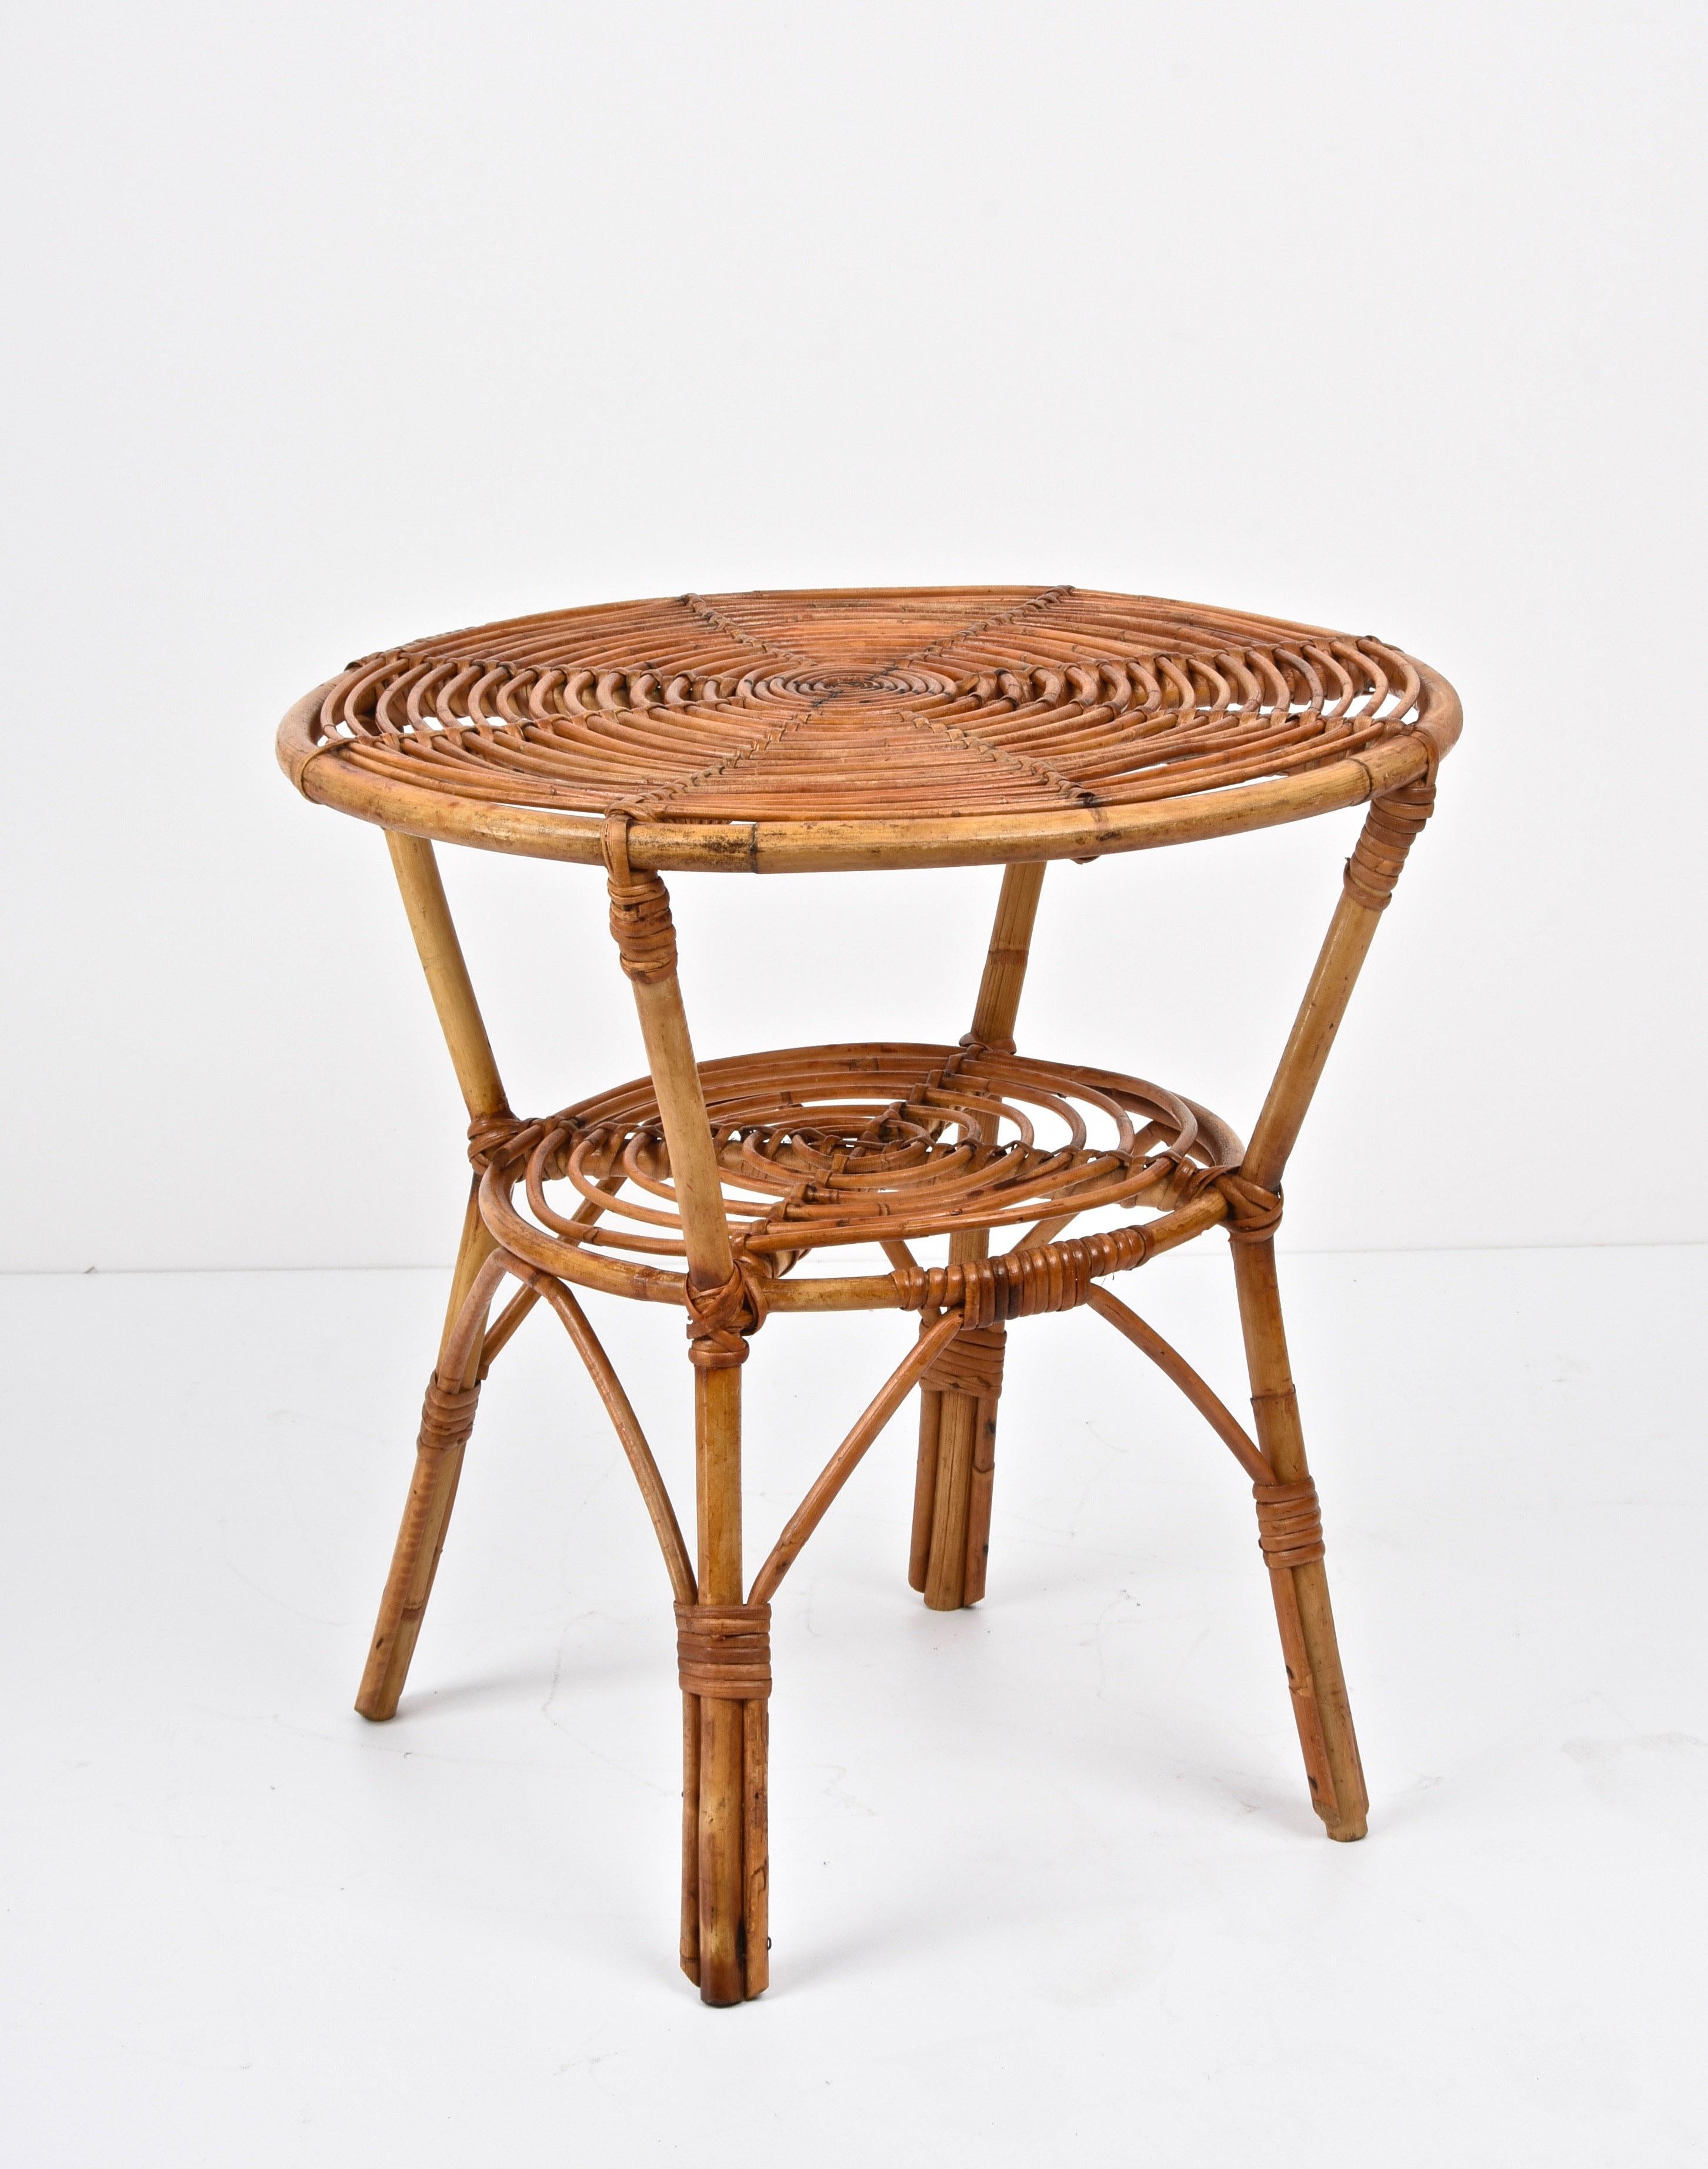 Midcentury Italian Round Rattan and Bamboo Coffee Table with Lower Shelf, 1960s For Sale 2